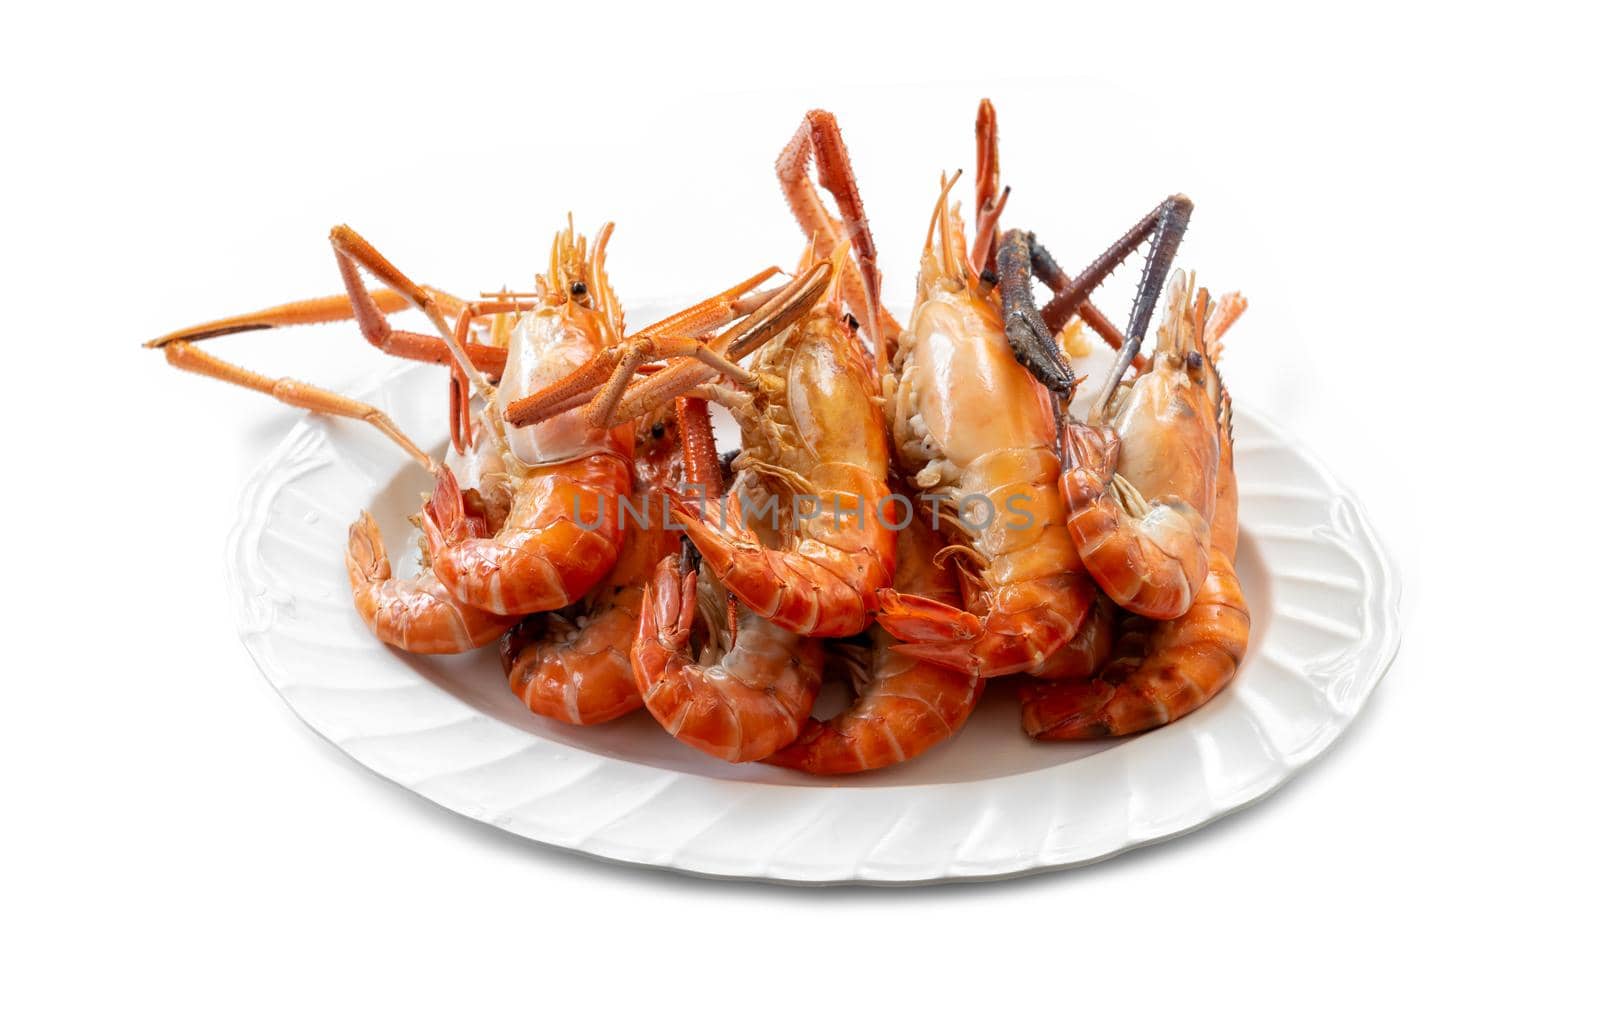 Several large river prawns, grilled and placed on a plate, are ready to eat. by wattanaphob